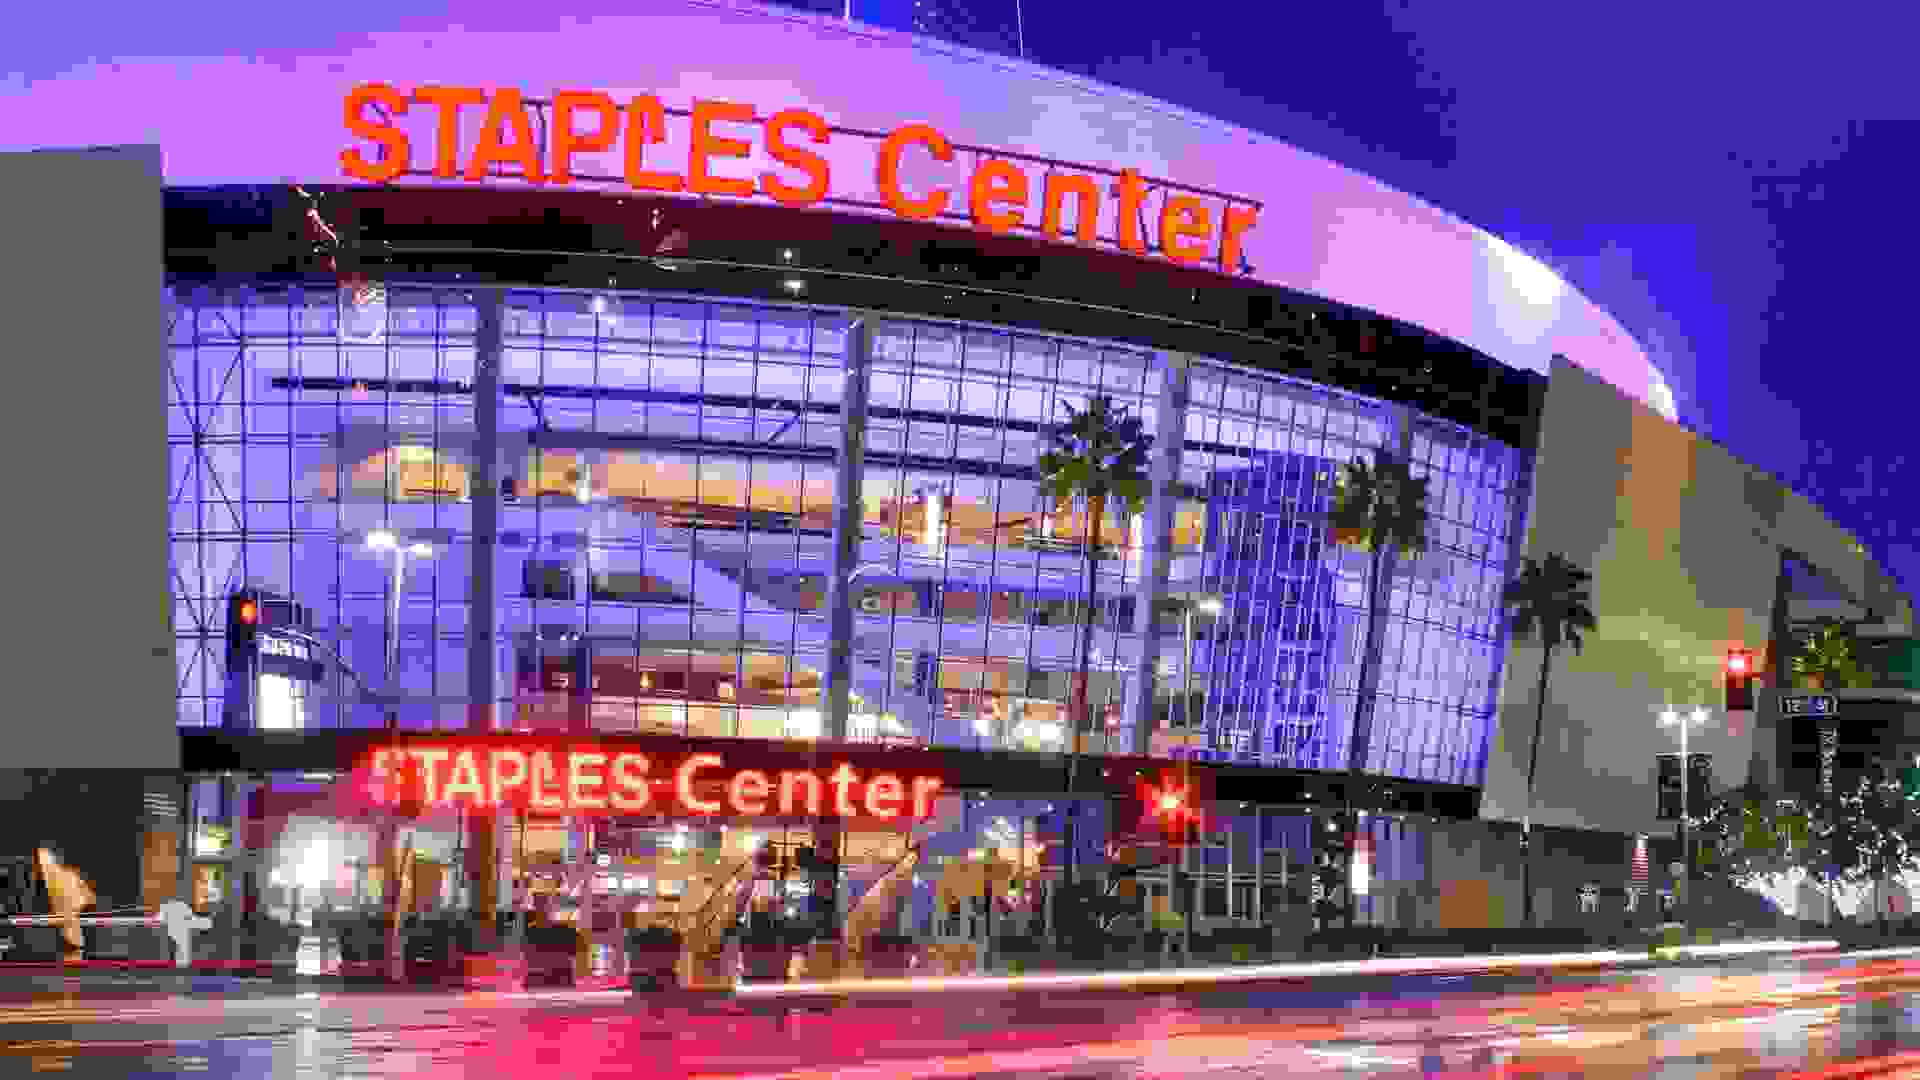 Staples Center Los Angeles Lakers Clippers stadium